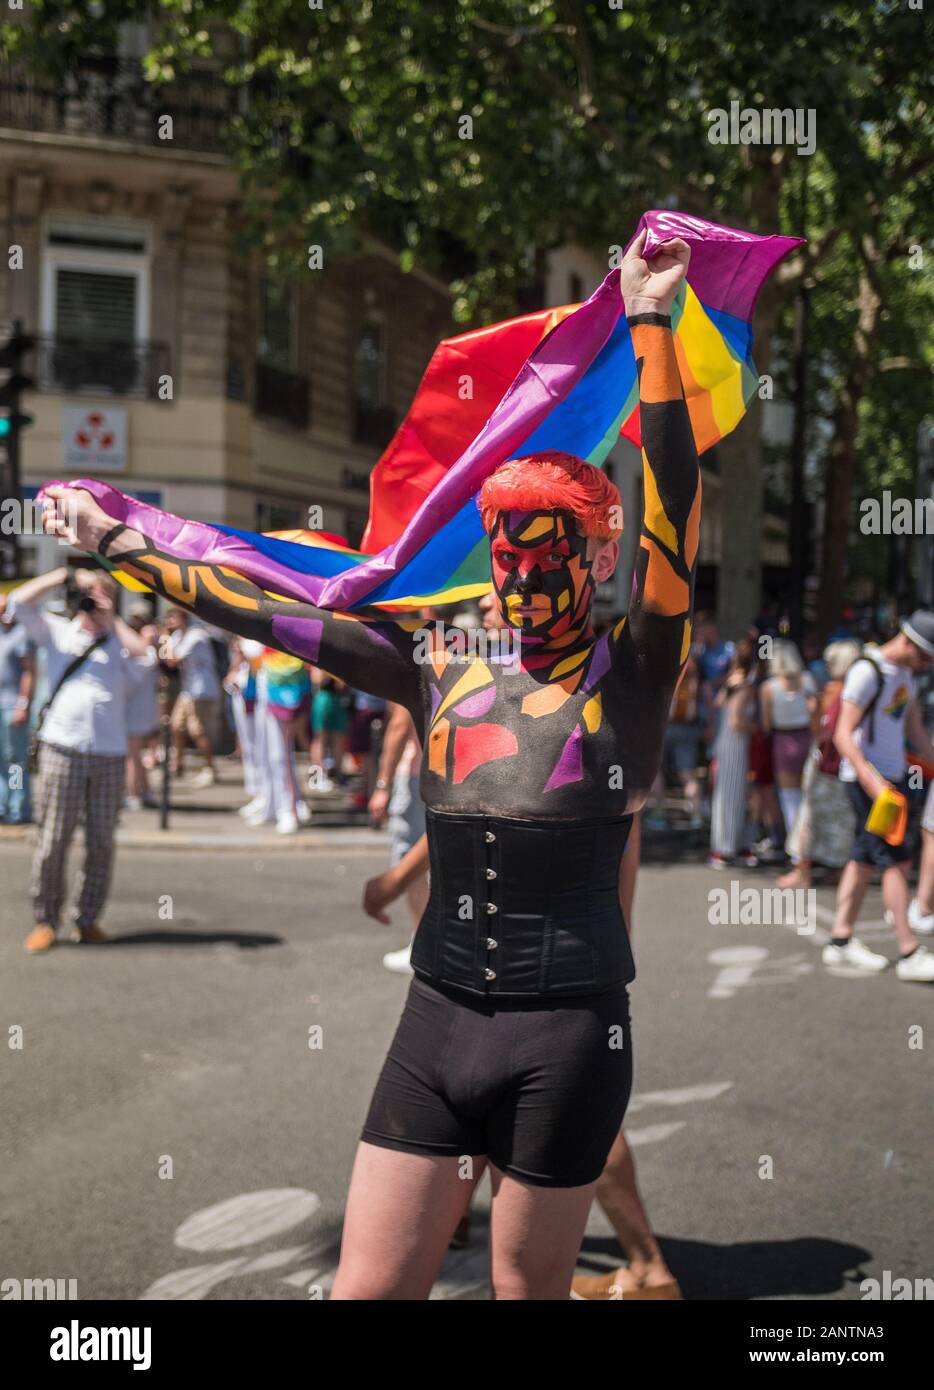 June 29 2019, Paris, France. Gay Pride Parade Day. Young man holding a flag. His face and body are painted ! Beautiful design & motives. Stock Photo